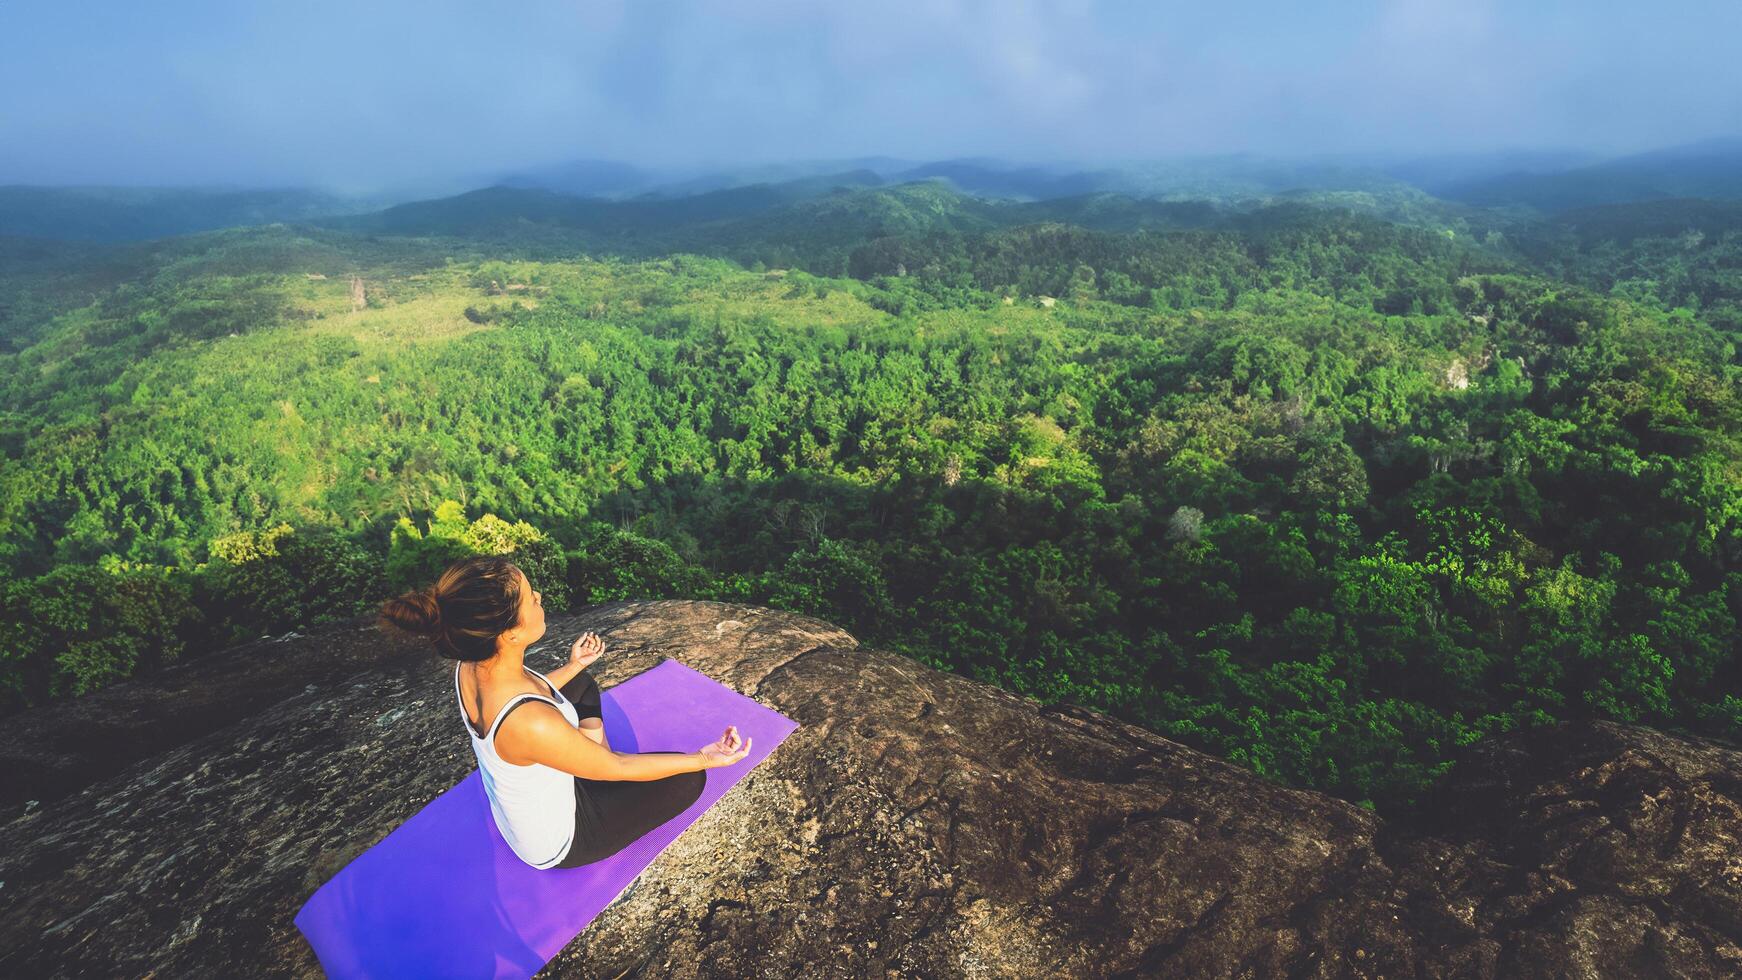 Asian women relax in the holiday. Play if yoga. On the Moutain rock cliff. Nature of mountain forests in Thailand photo